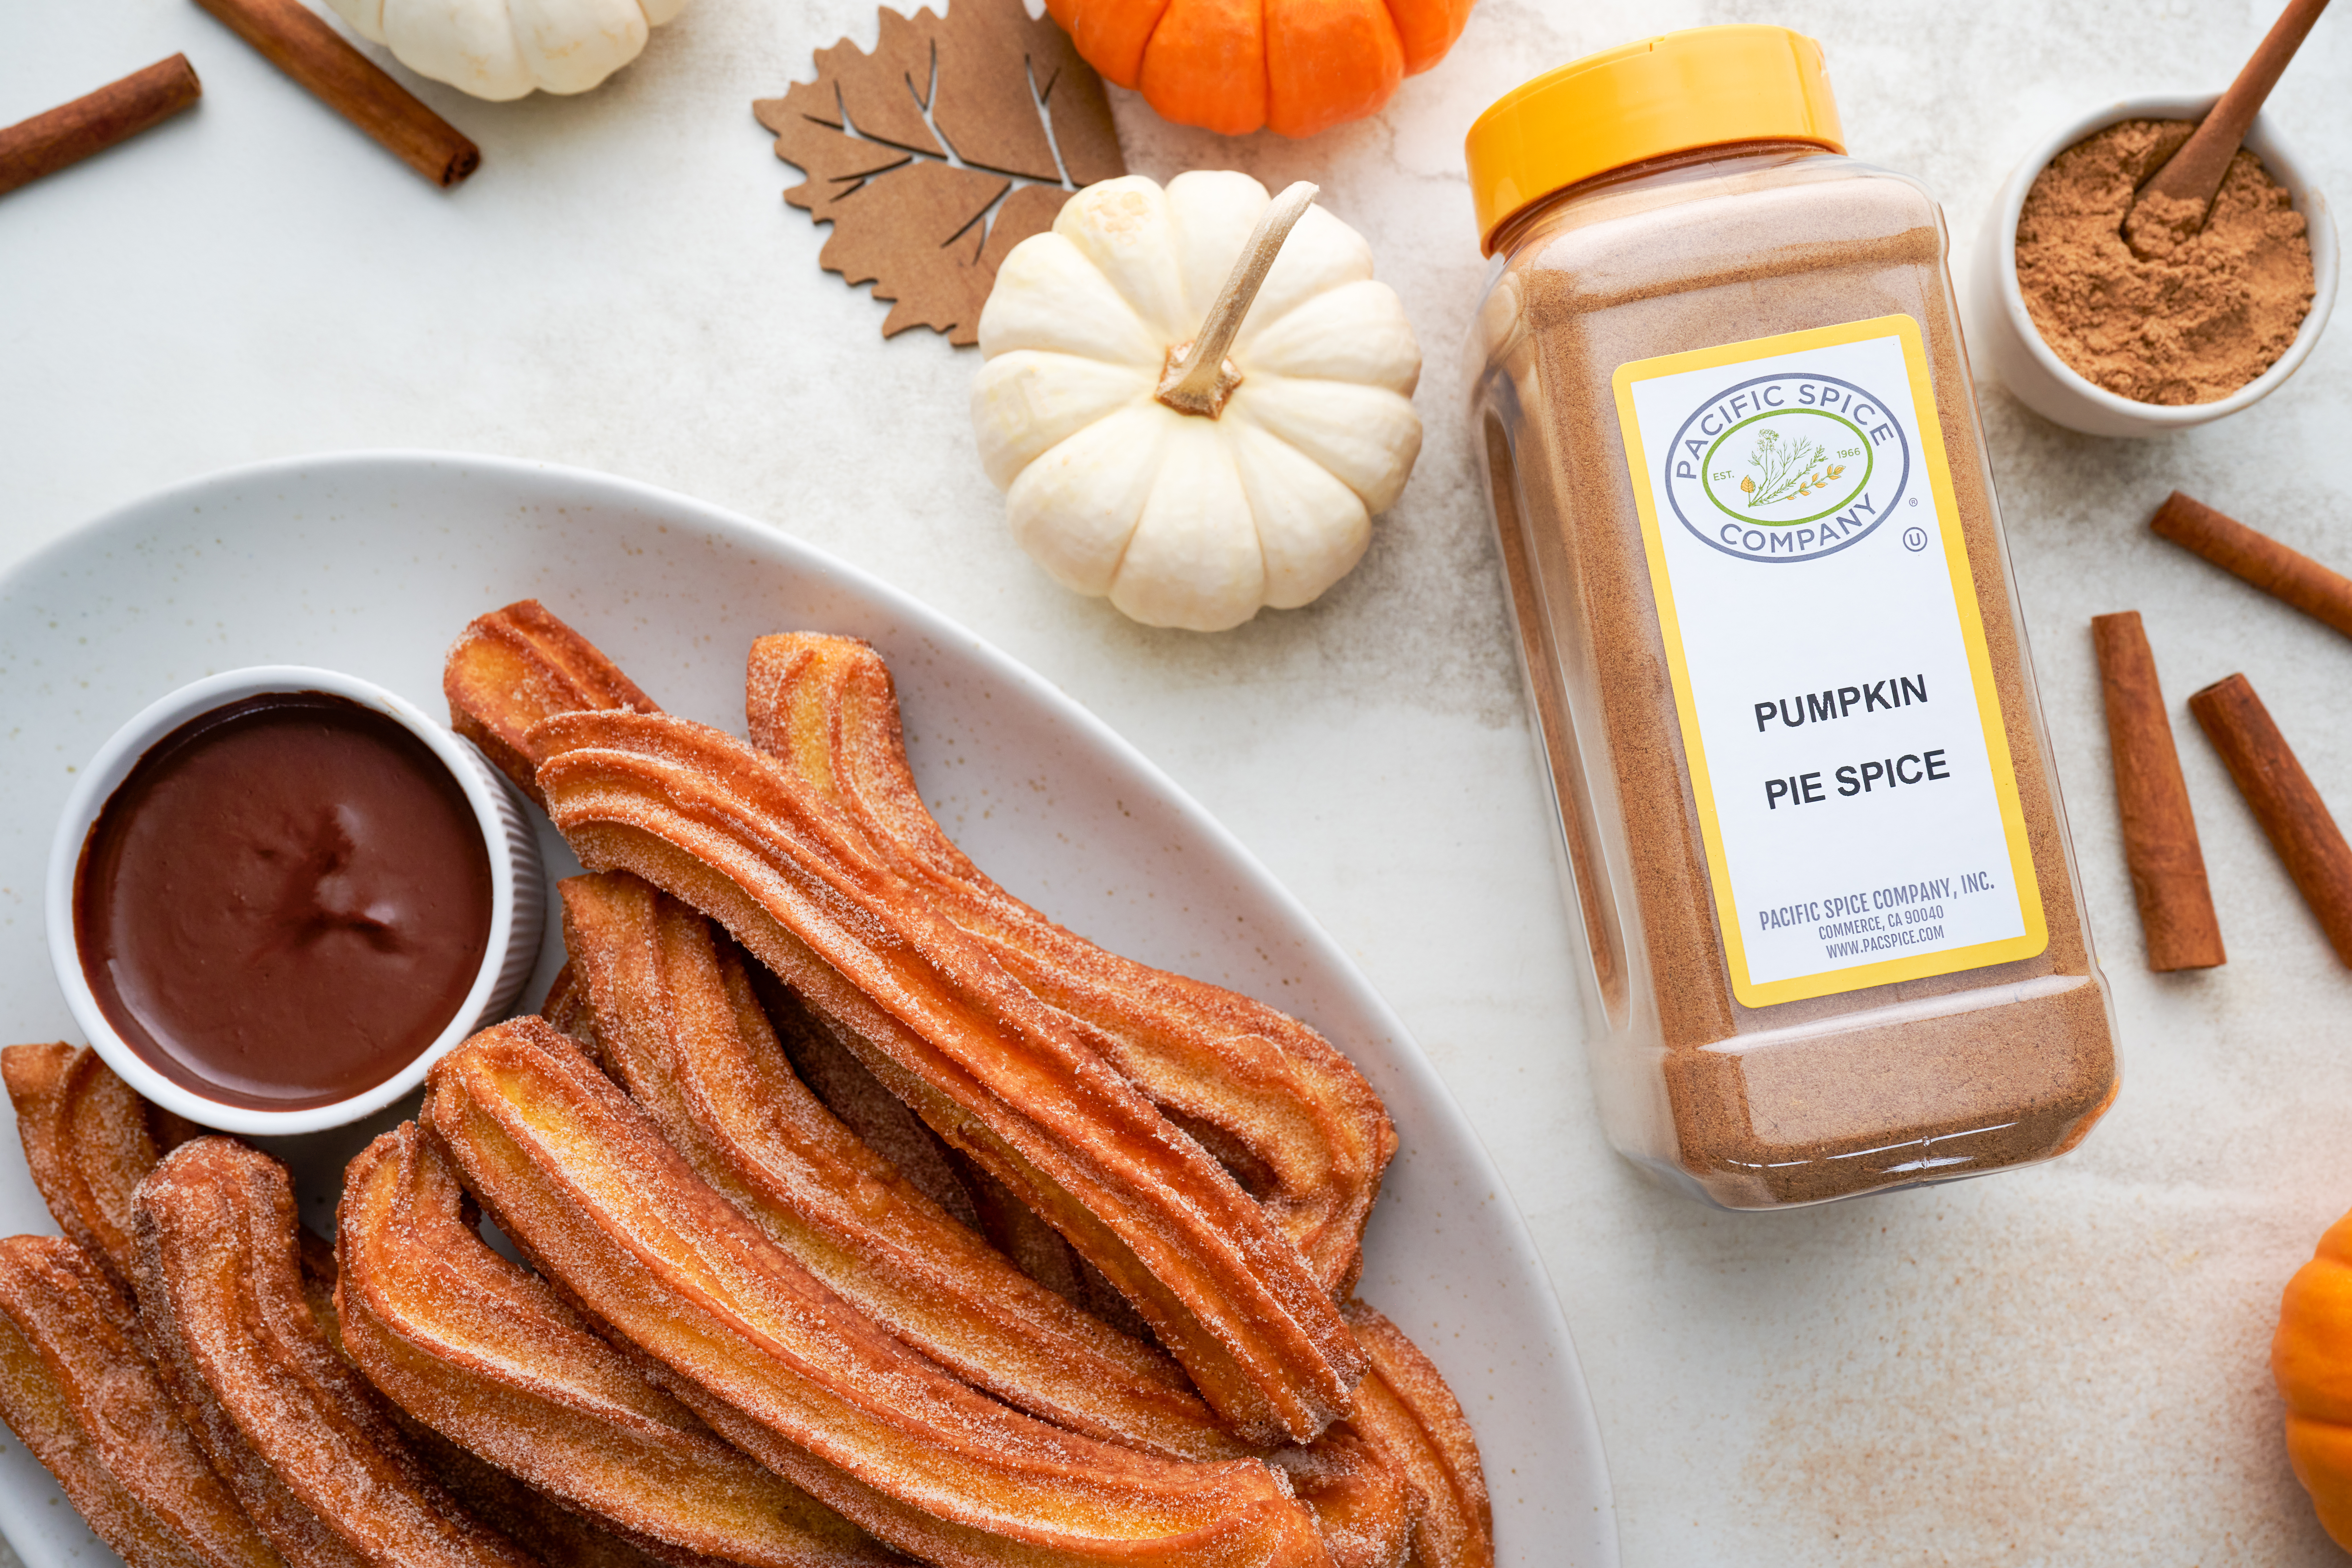 wholesale pumpkin pie spice used to make churros